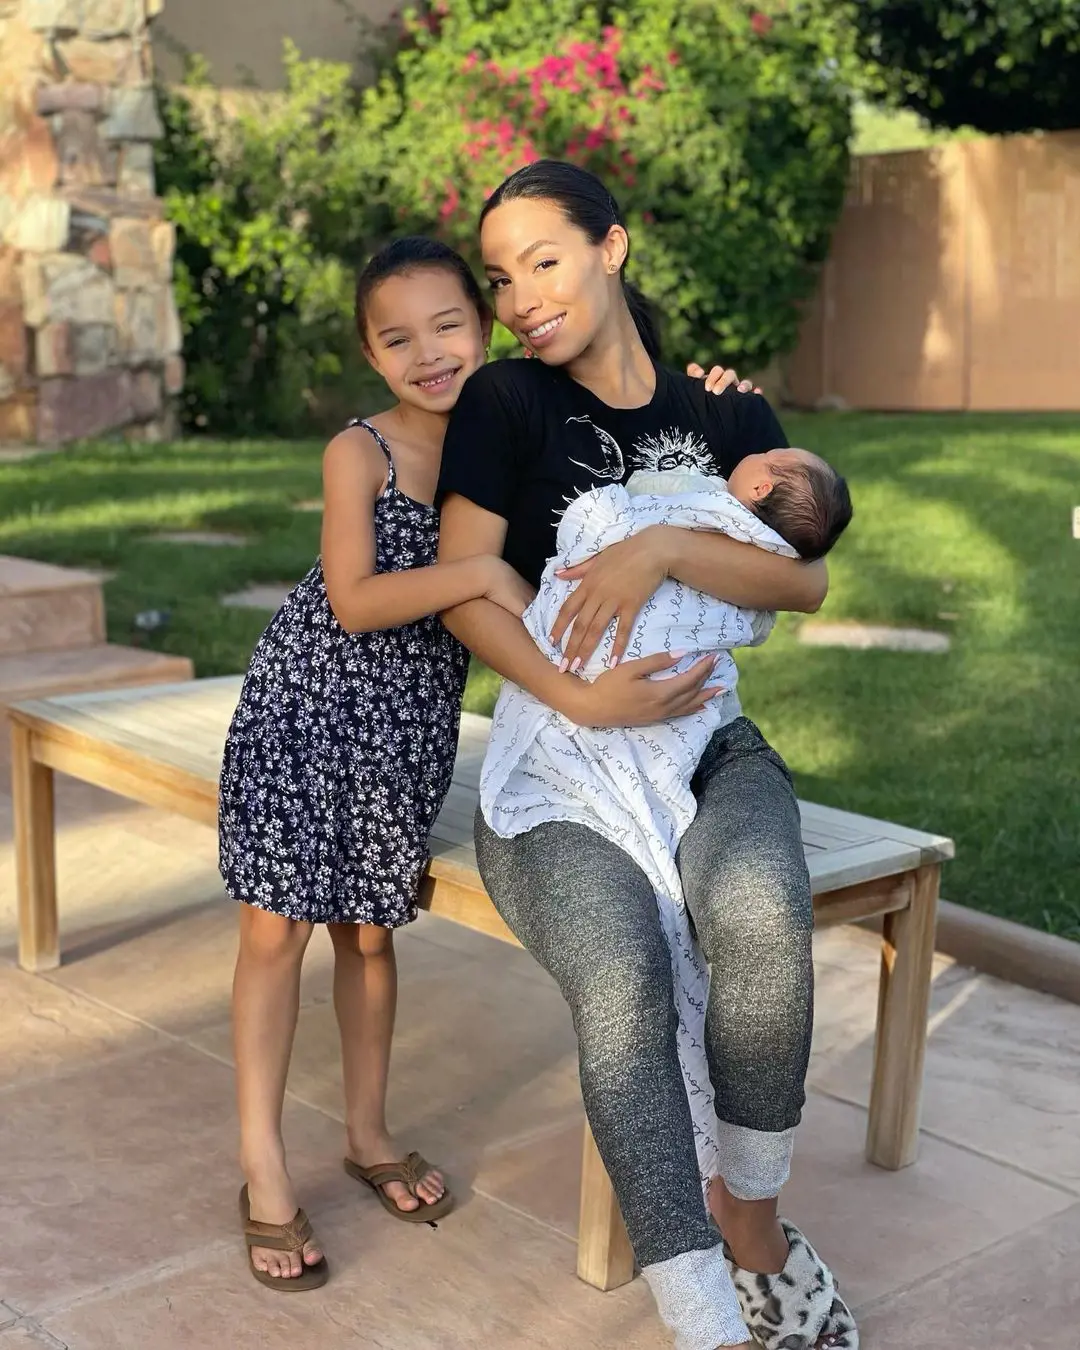 Giselle celebrating her birthday with her daughters Genevieve Grey and Everleigh in July 2022